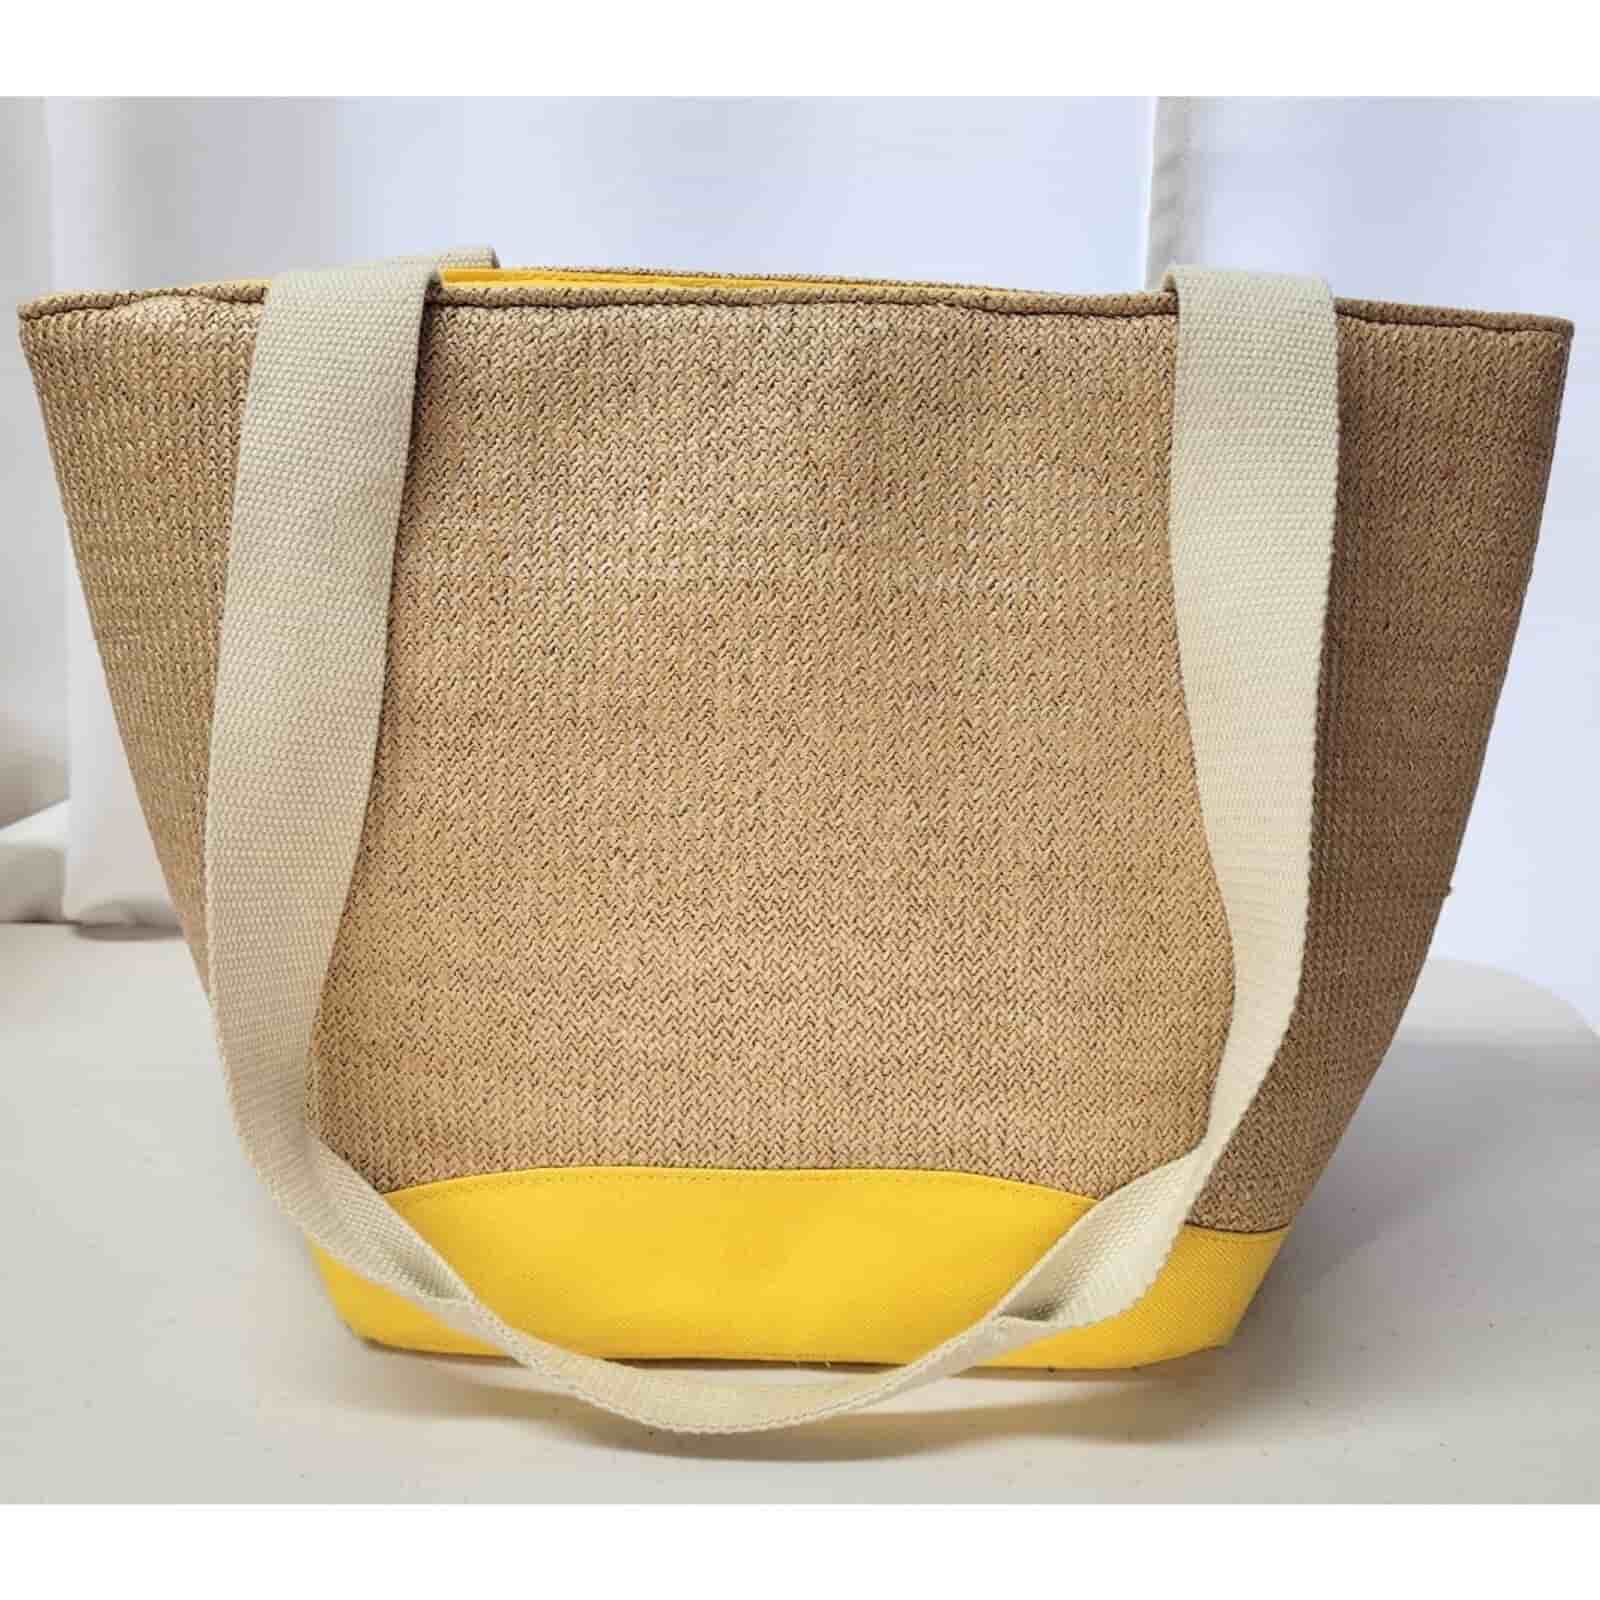 Insulated Lunch Bag Cooler Beach Tote Yellow Beige Weave Straw wholesale details3